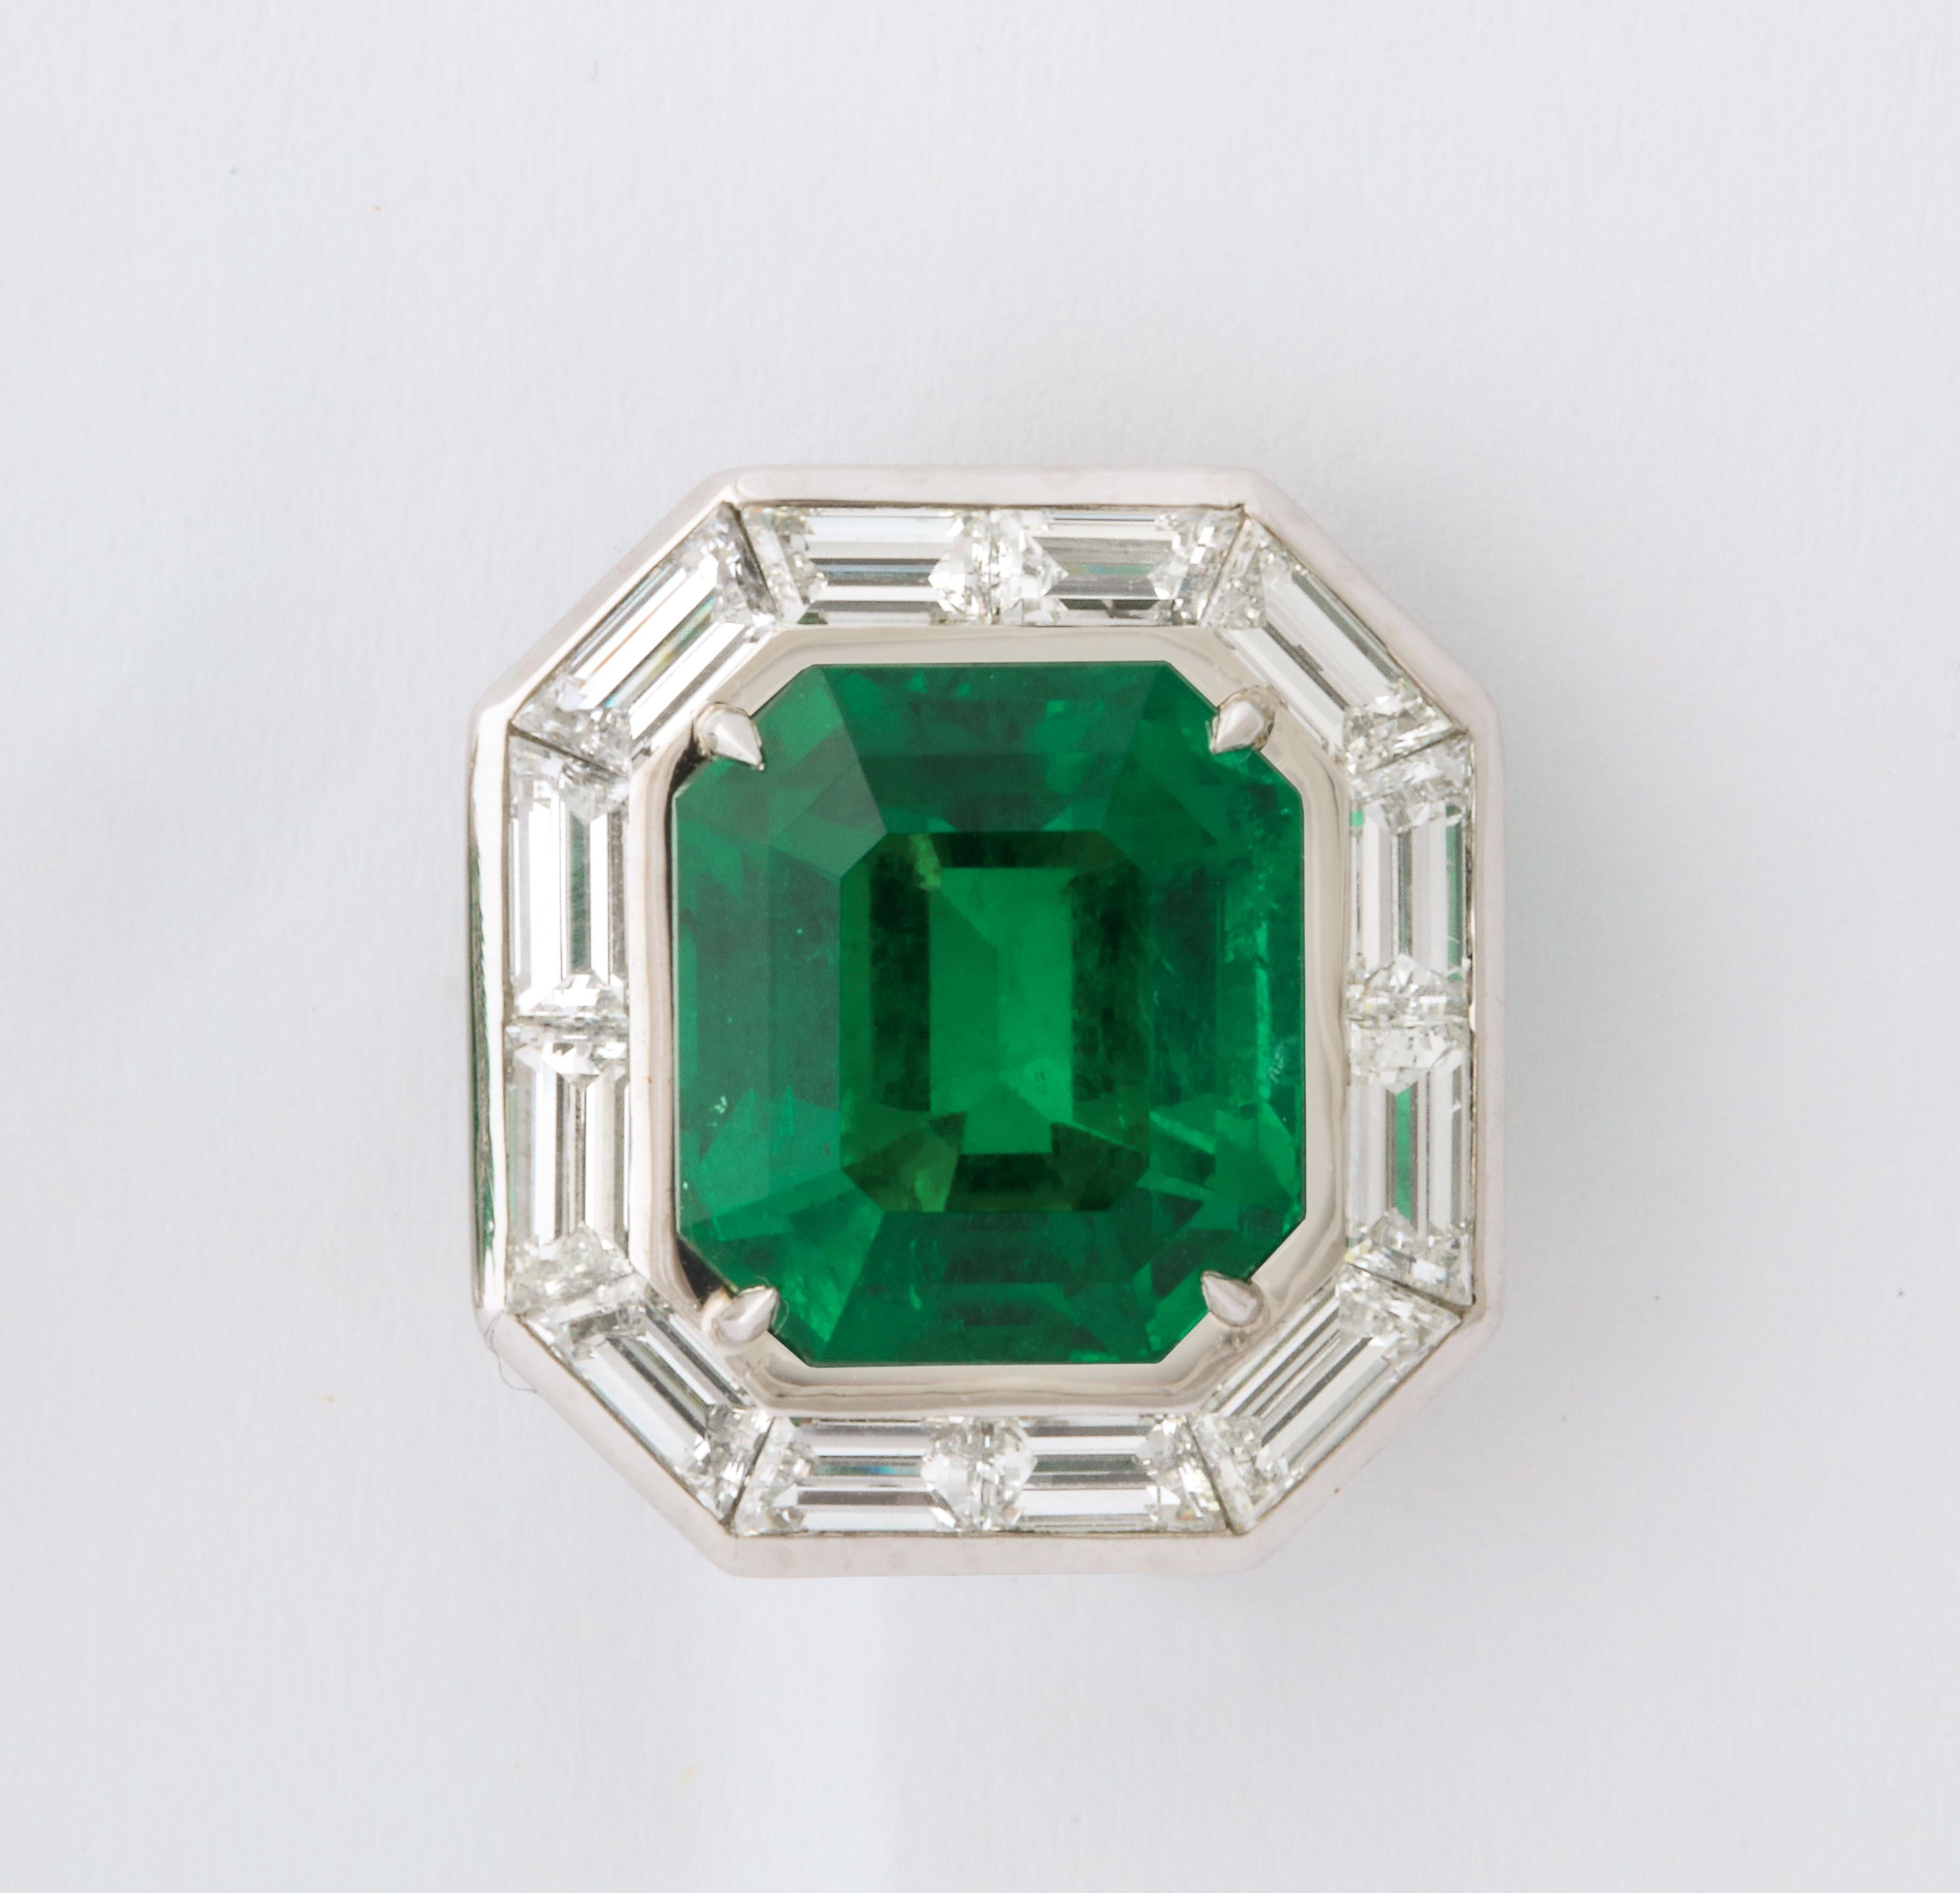 Contemporary Important Colombian Emerald Diamond Earrings